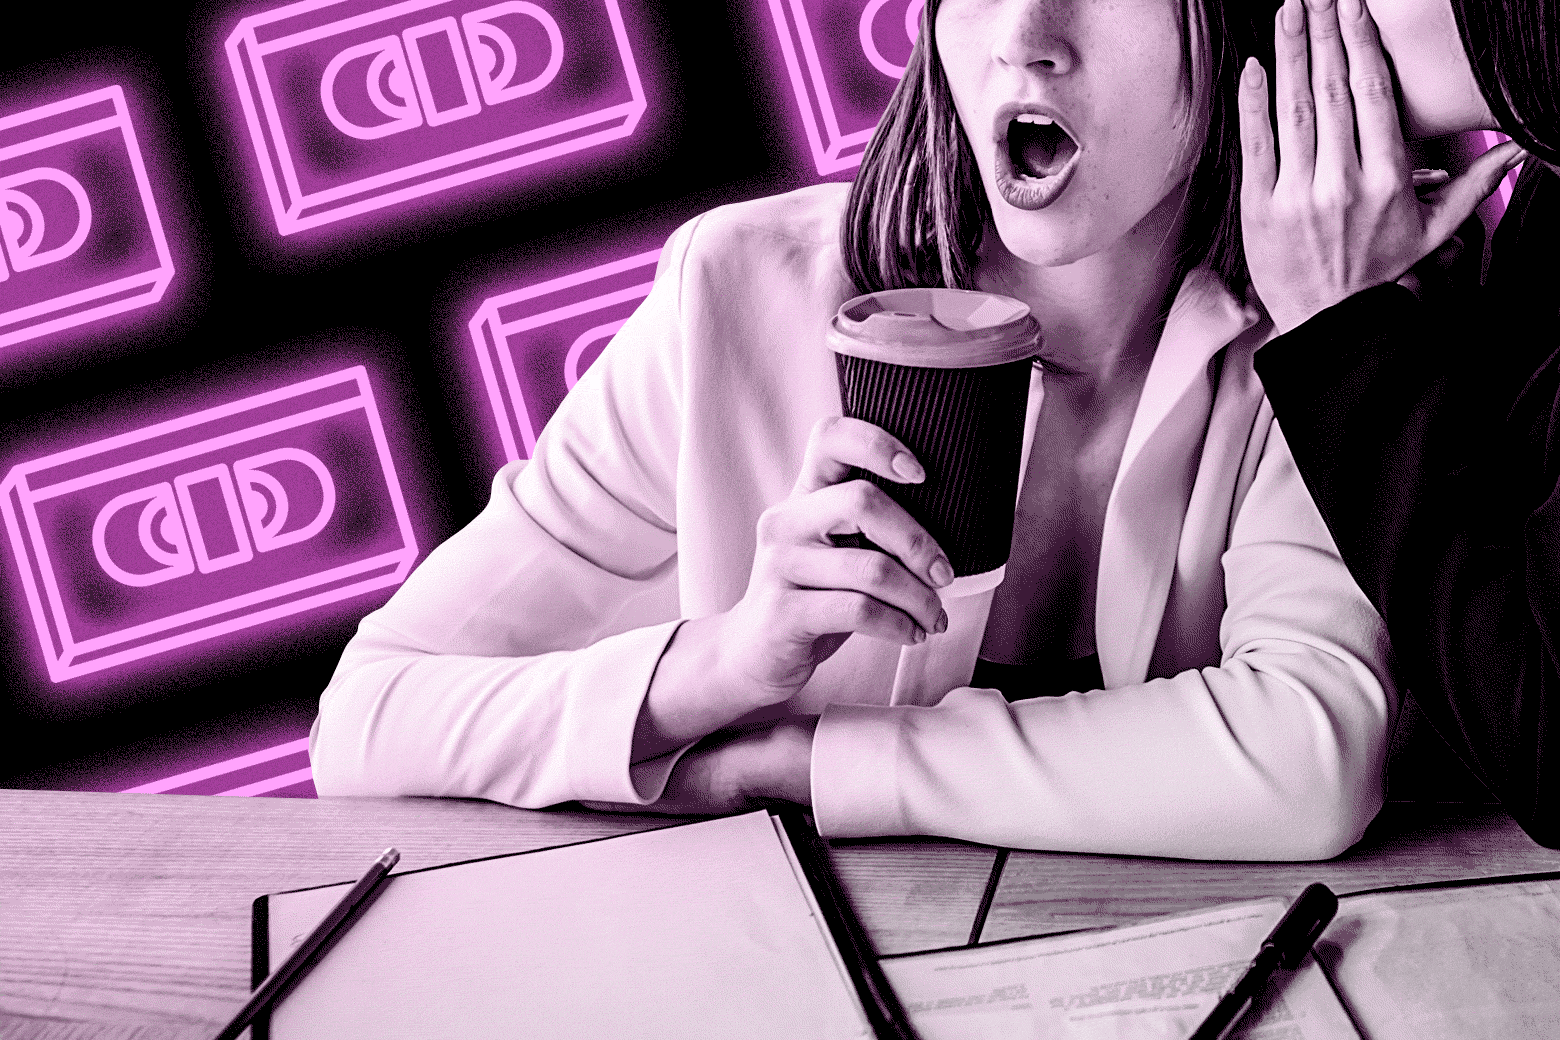 GIF of a woman expressing surprise while lifting a covered cup to her mouth as someone whispers in her ear. Animated neon VHS tapes glow in the background.